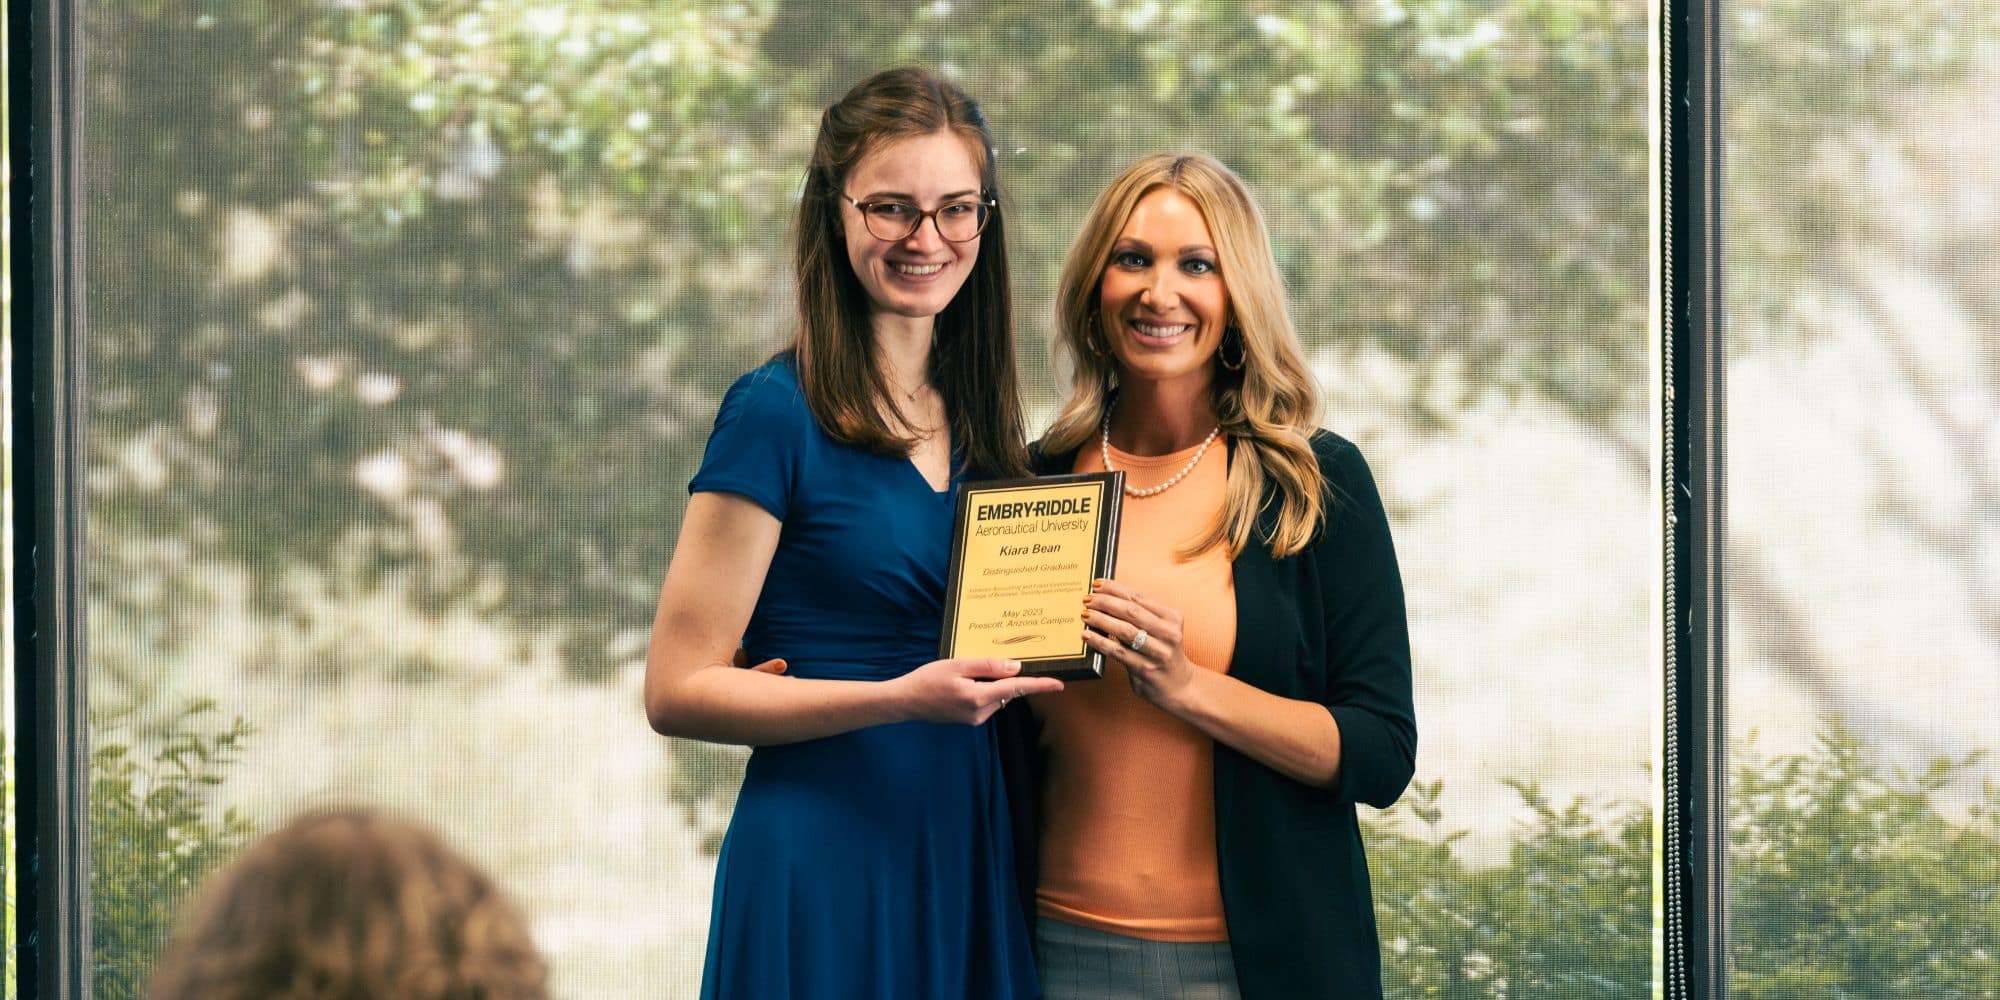 Kiara Bean (left) accepting her Distinguished Graduate Award from Samantha Friedlan, instructor of business, at the College of Business, Security & Intelligence on Embry-Riddle's Prescott Campus. (Photo: Embry-Riddle / Connor McShane)